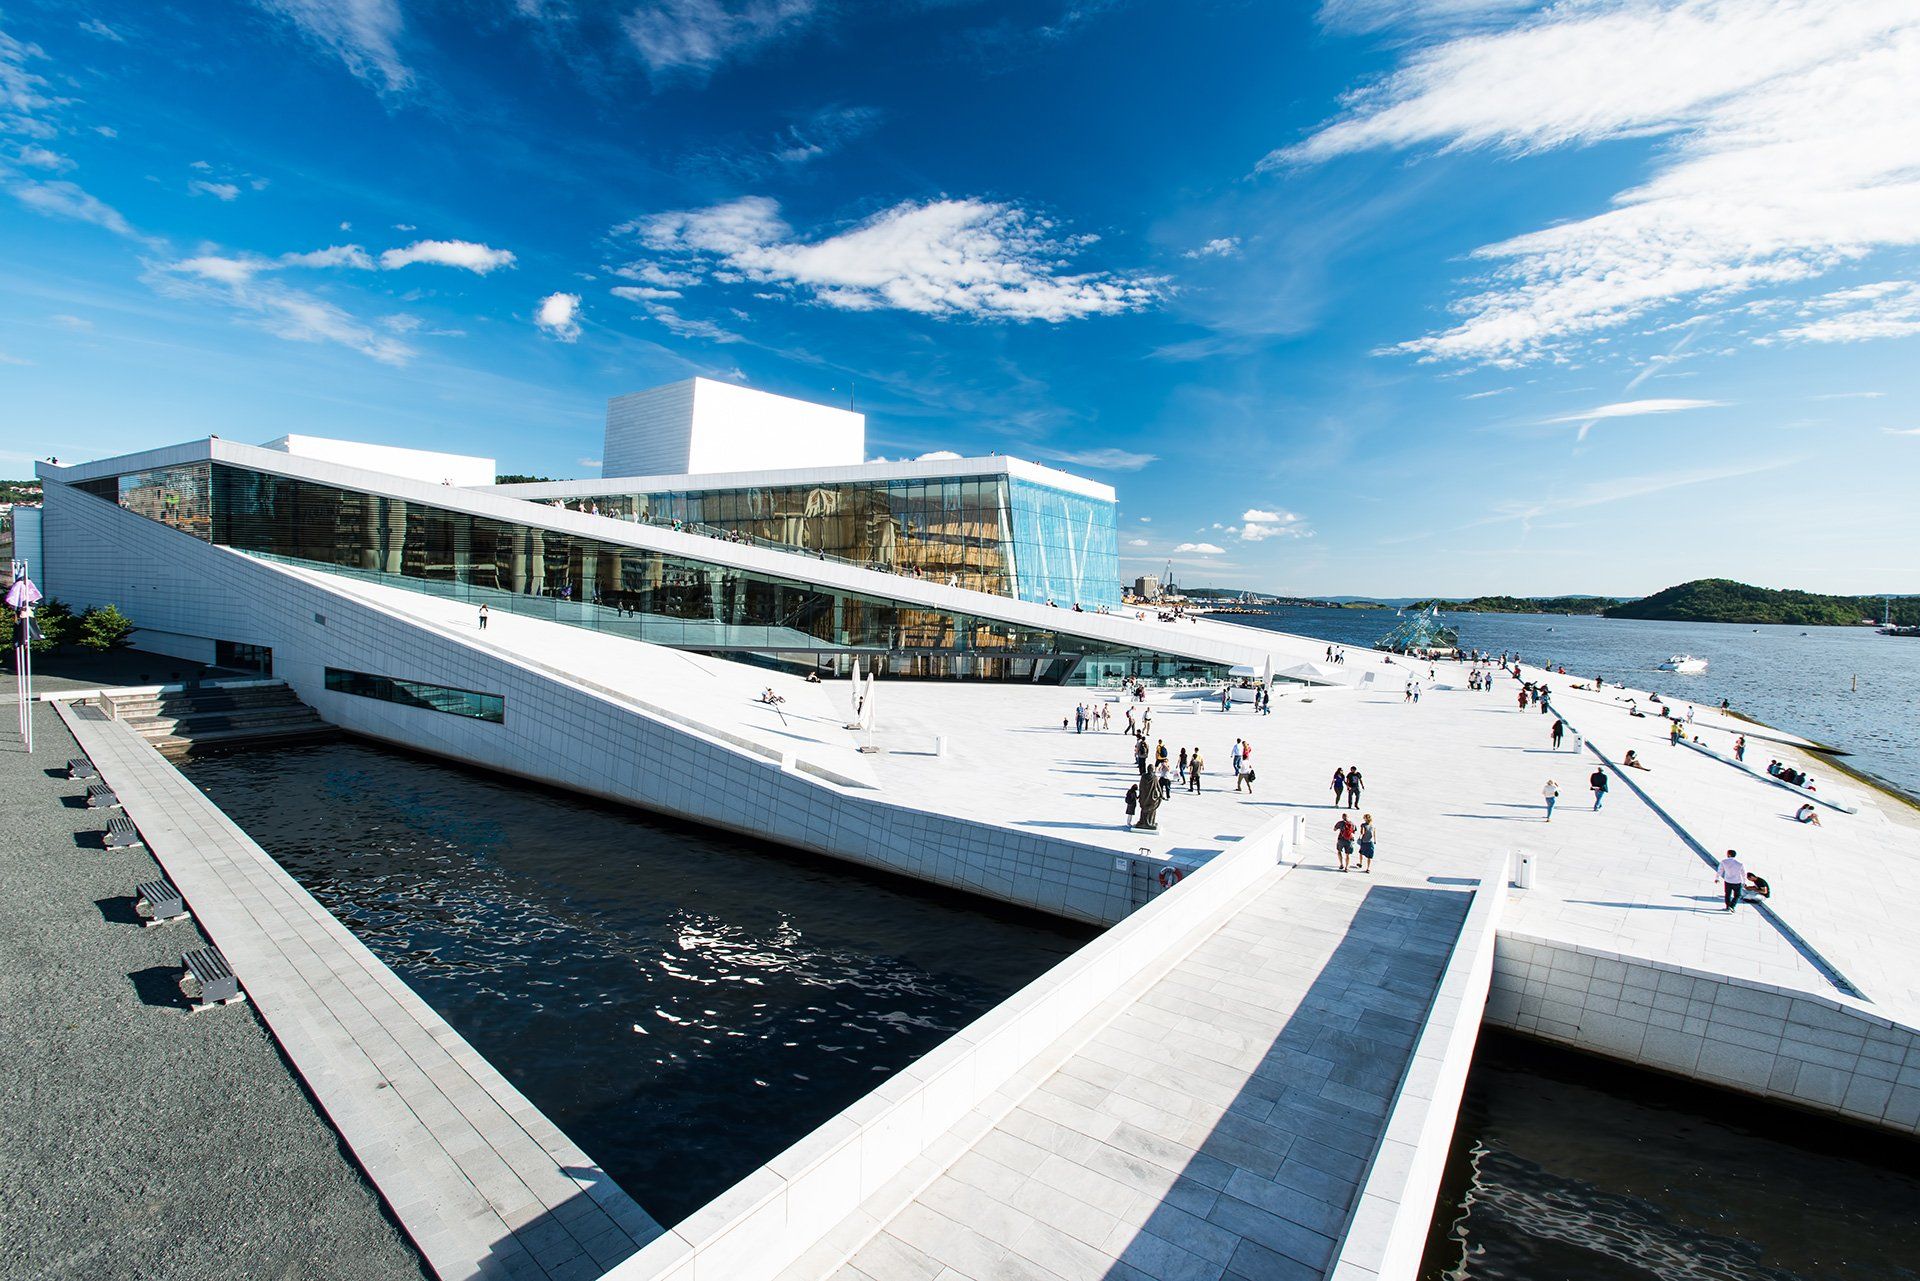 Top 5 Free Travel Attractions in Oslo